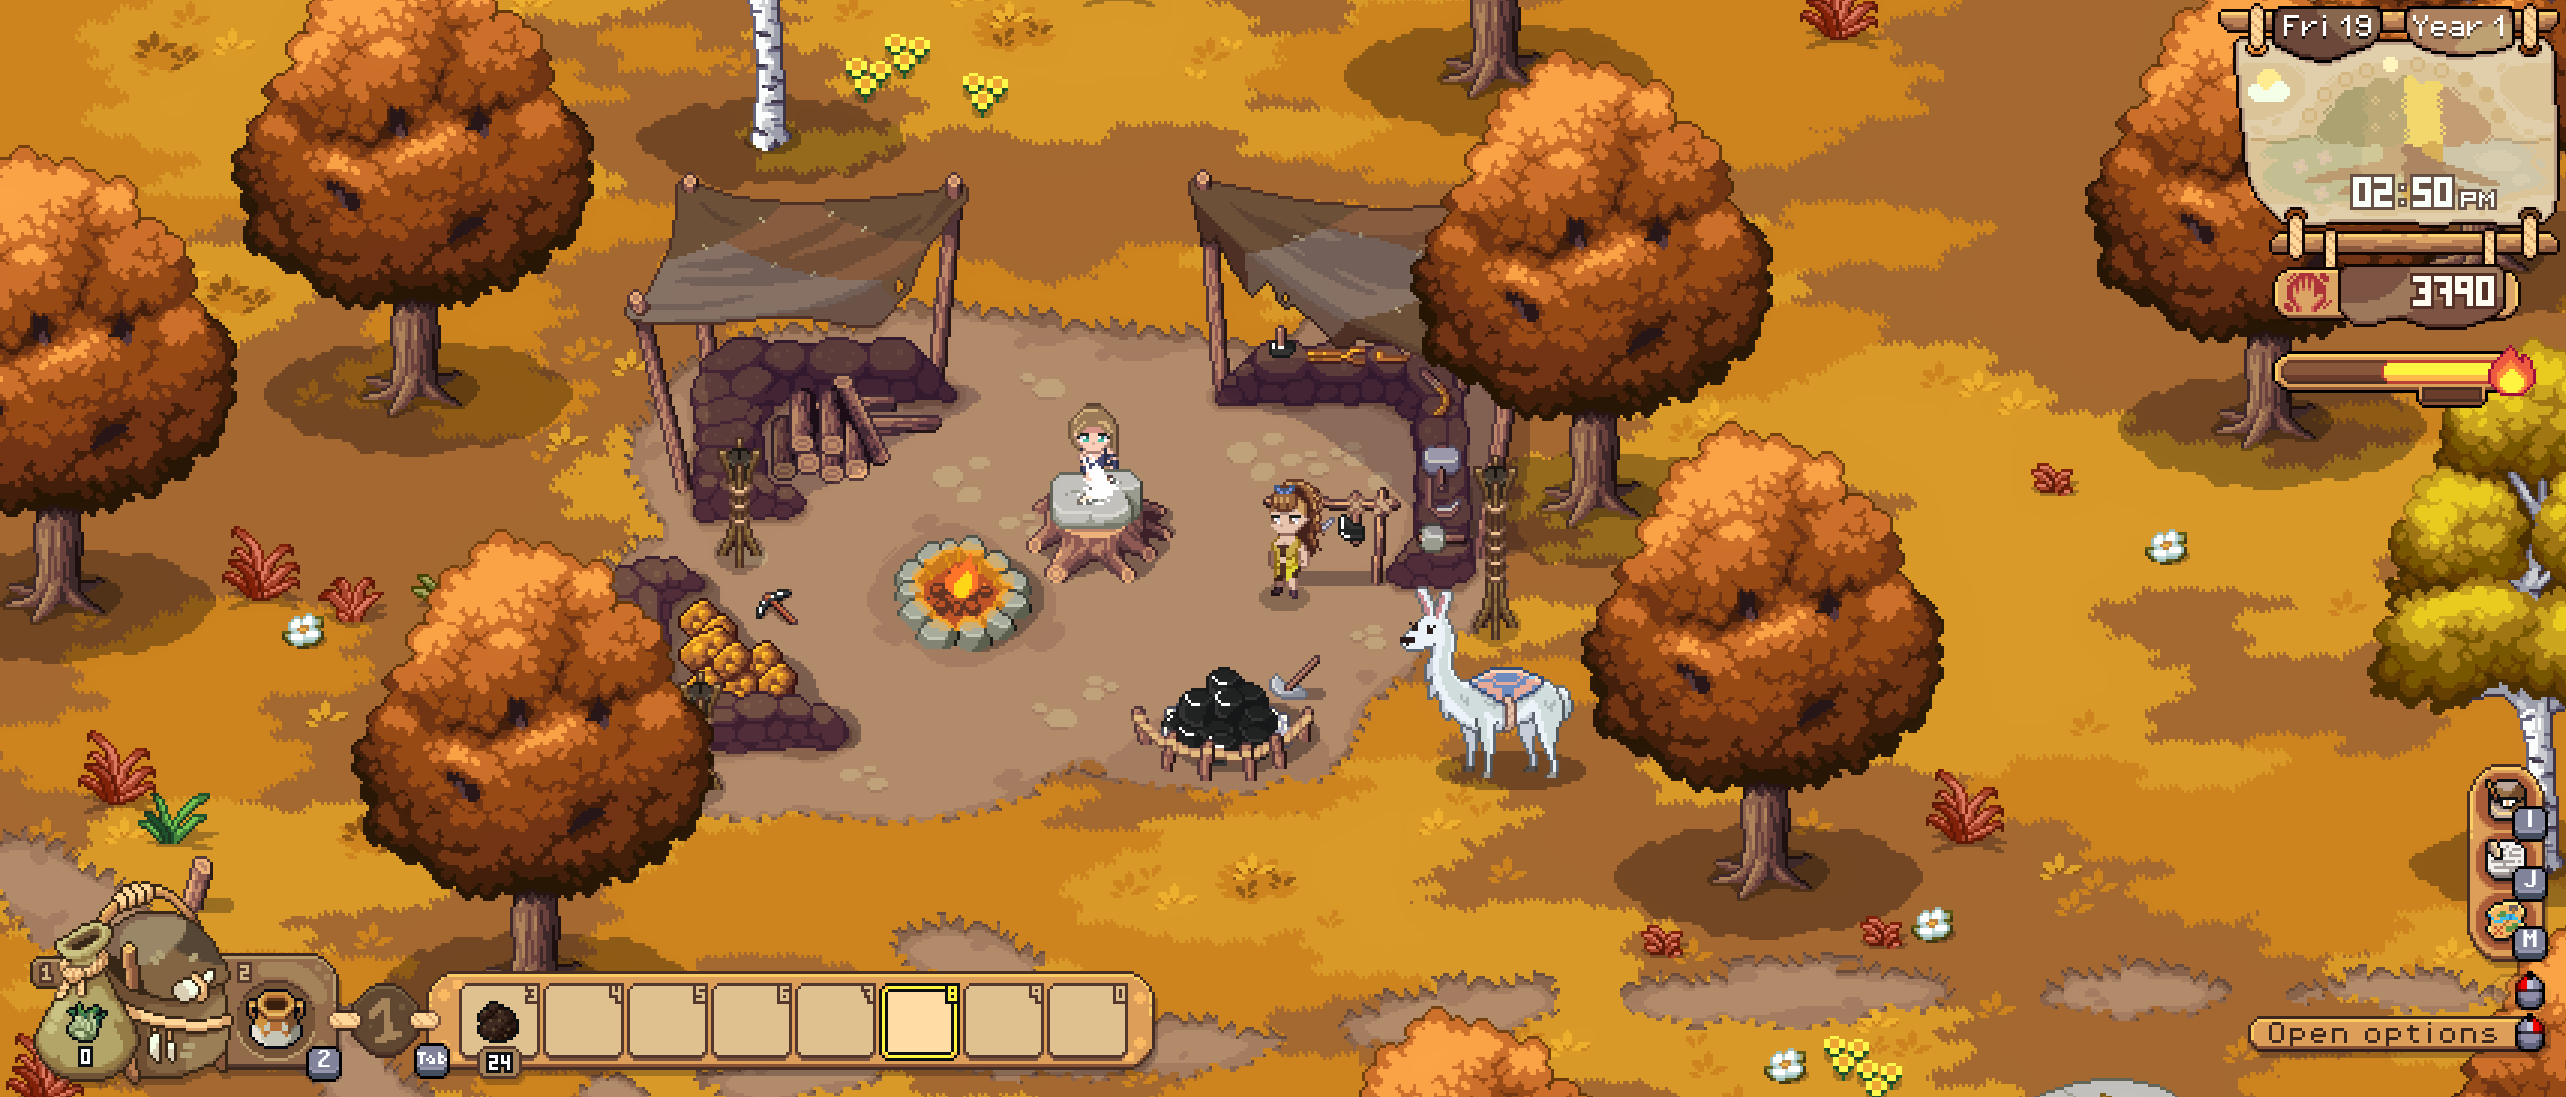 Roots of Pacha - A player stands near Acre's workstation in the autumn.